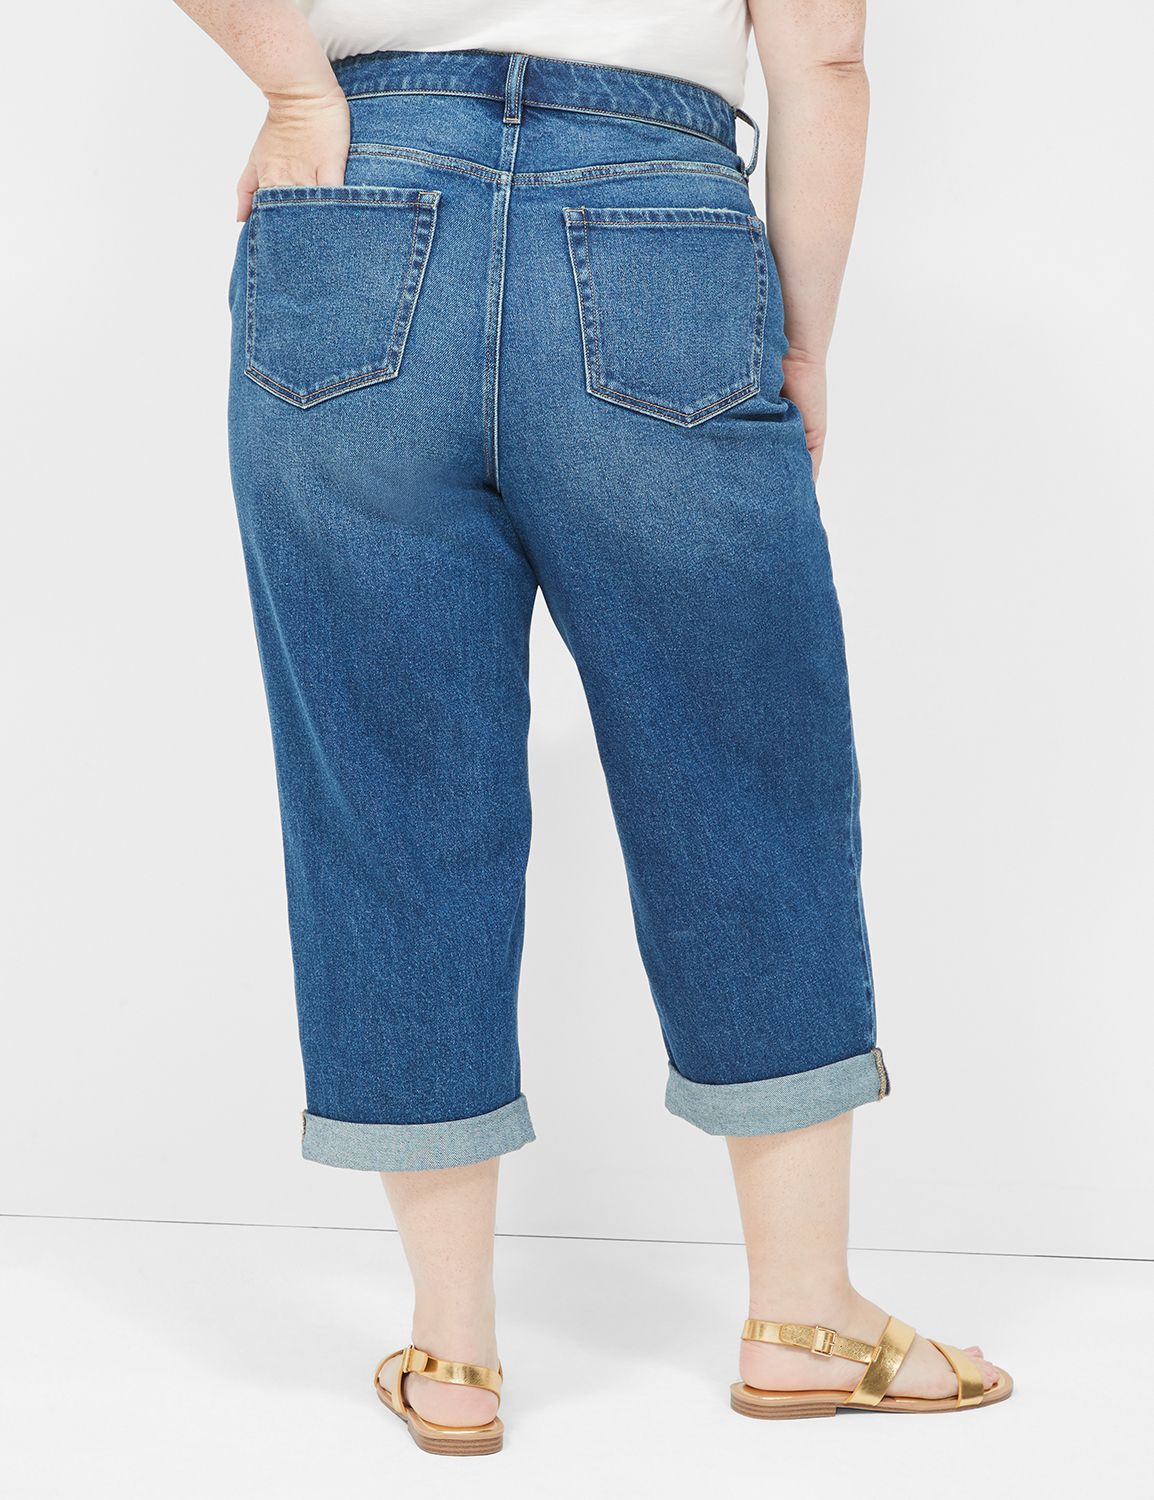 Plus Size Women's Jeans: Skinny, Flare & More